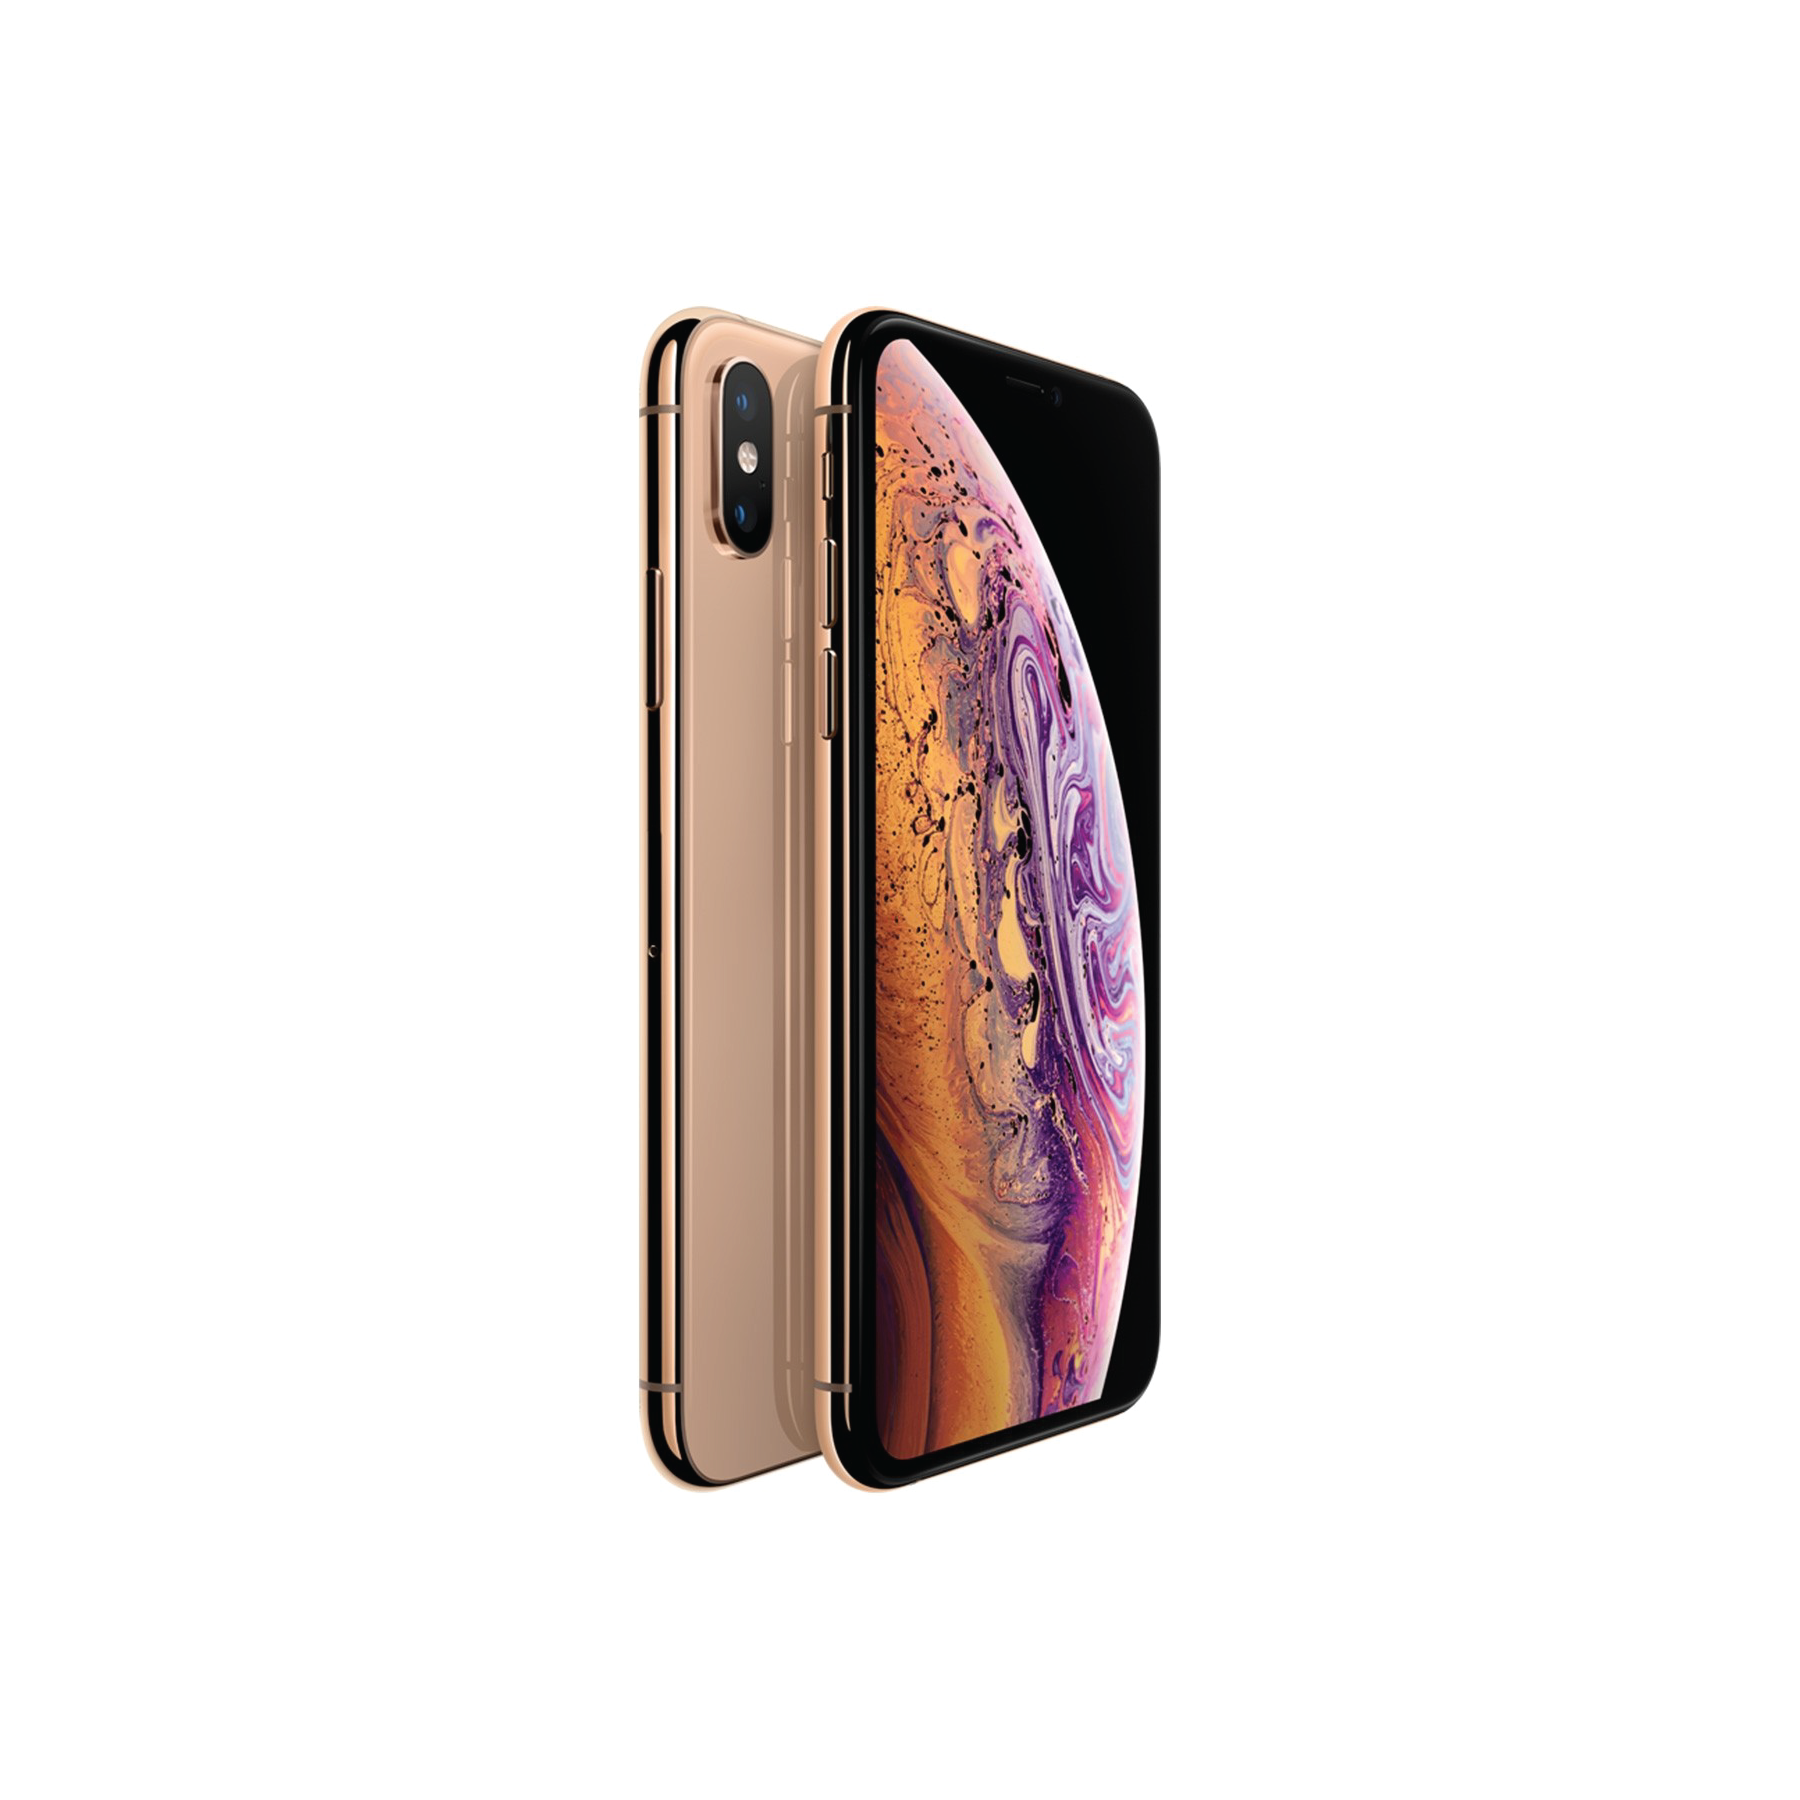 iPhone XS 256GB - Gold (Better)